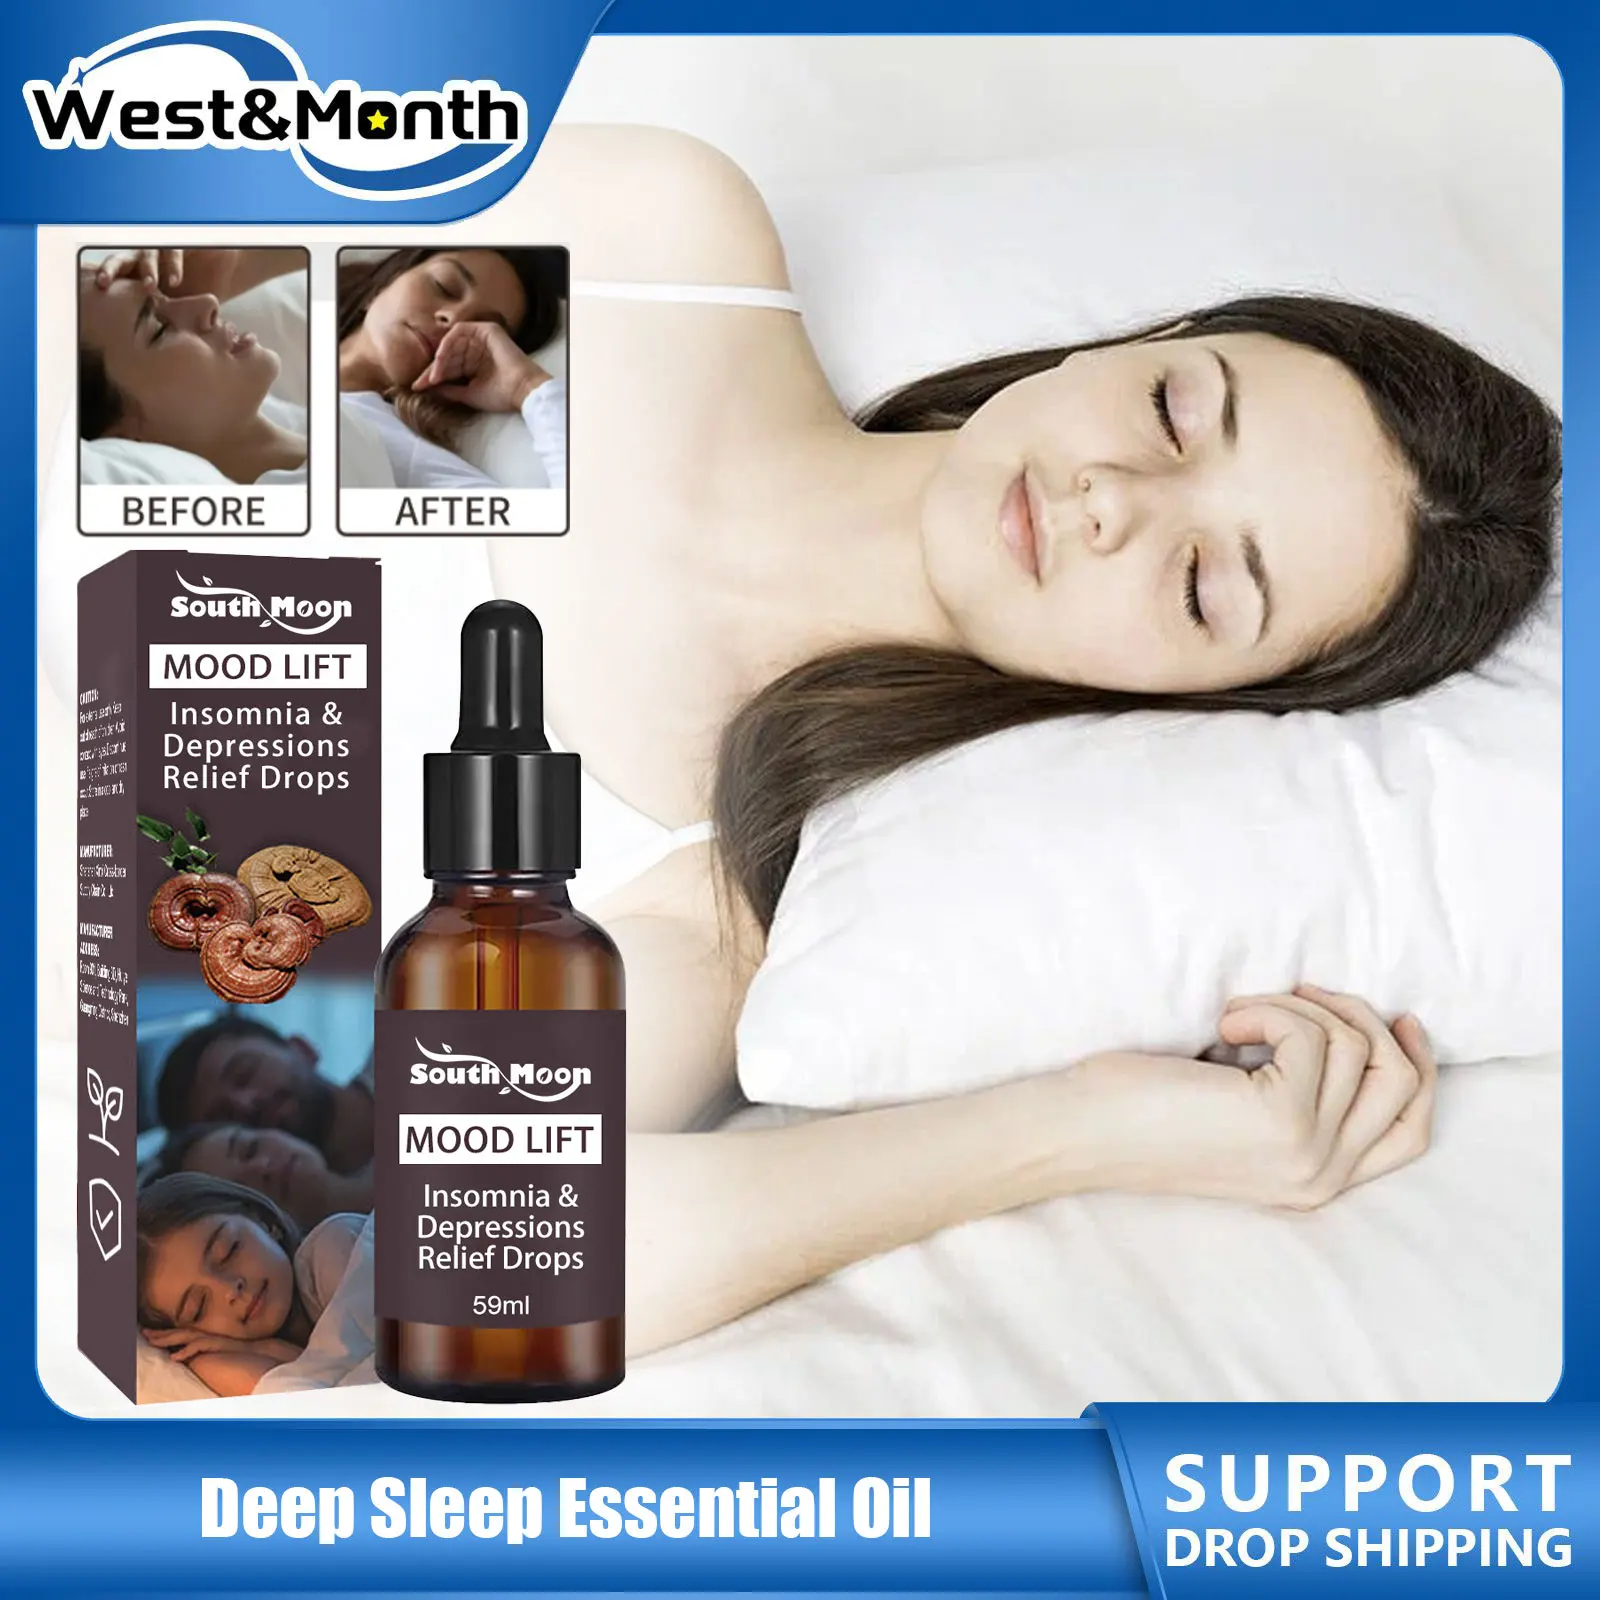 

Deep Sleep Essential Oil Relieve Stress Fatigue Anti Anxiety Soothing Mood Relax Body Improve Insomnia Sleep Aids Massage Drops